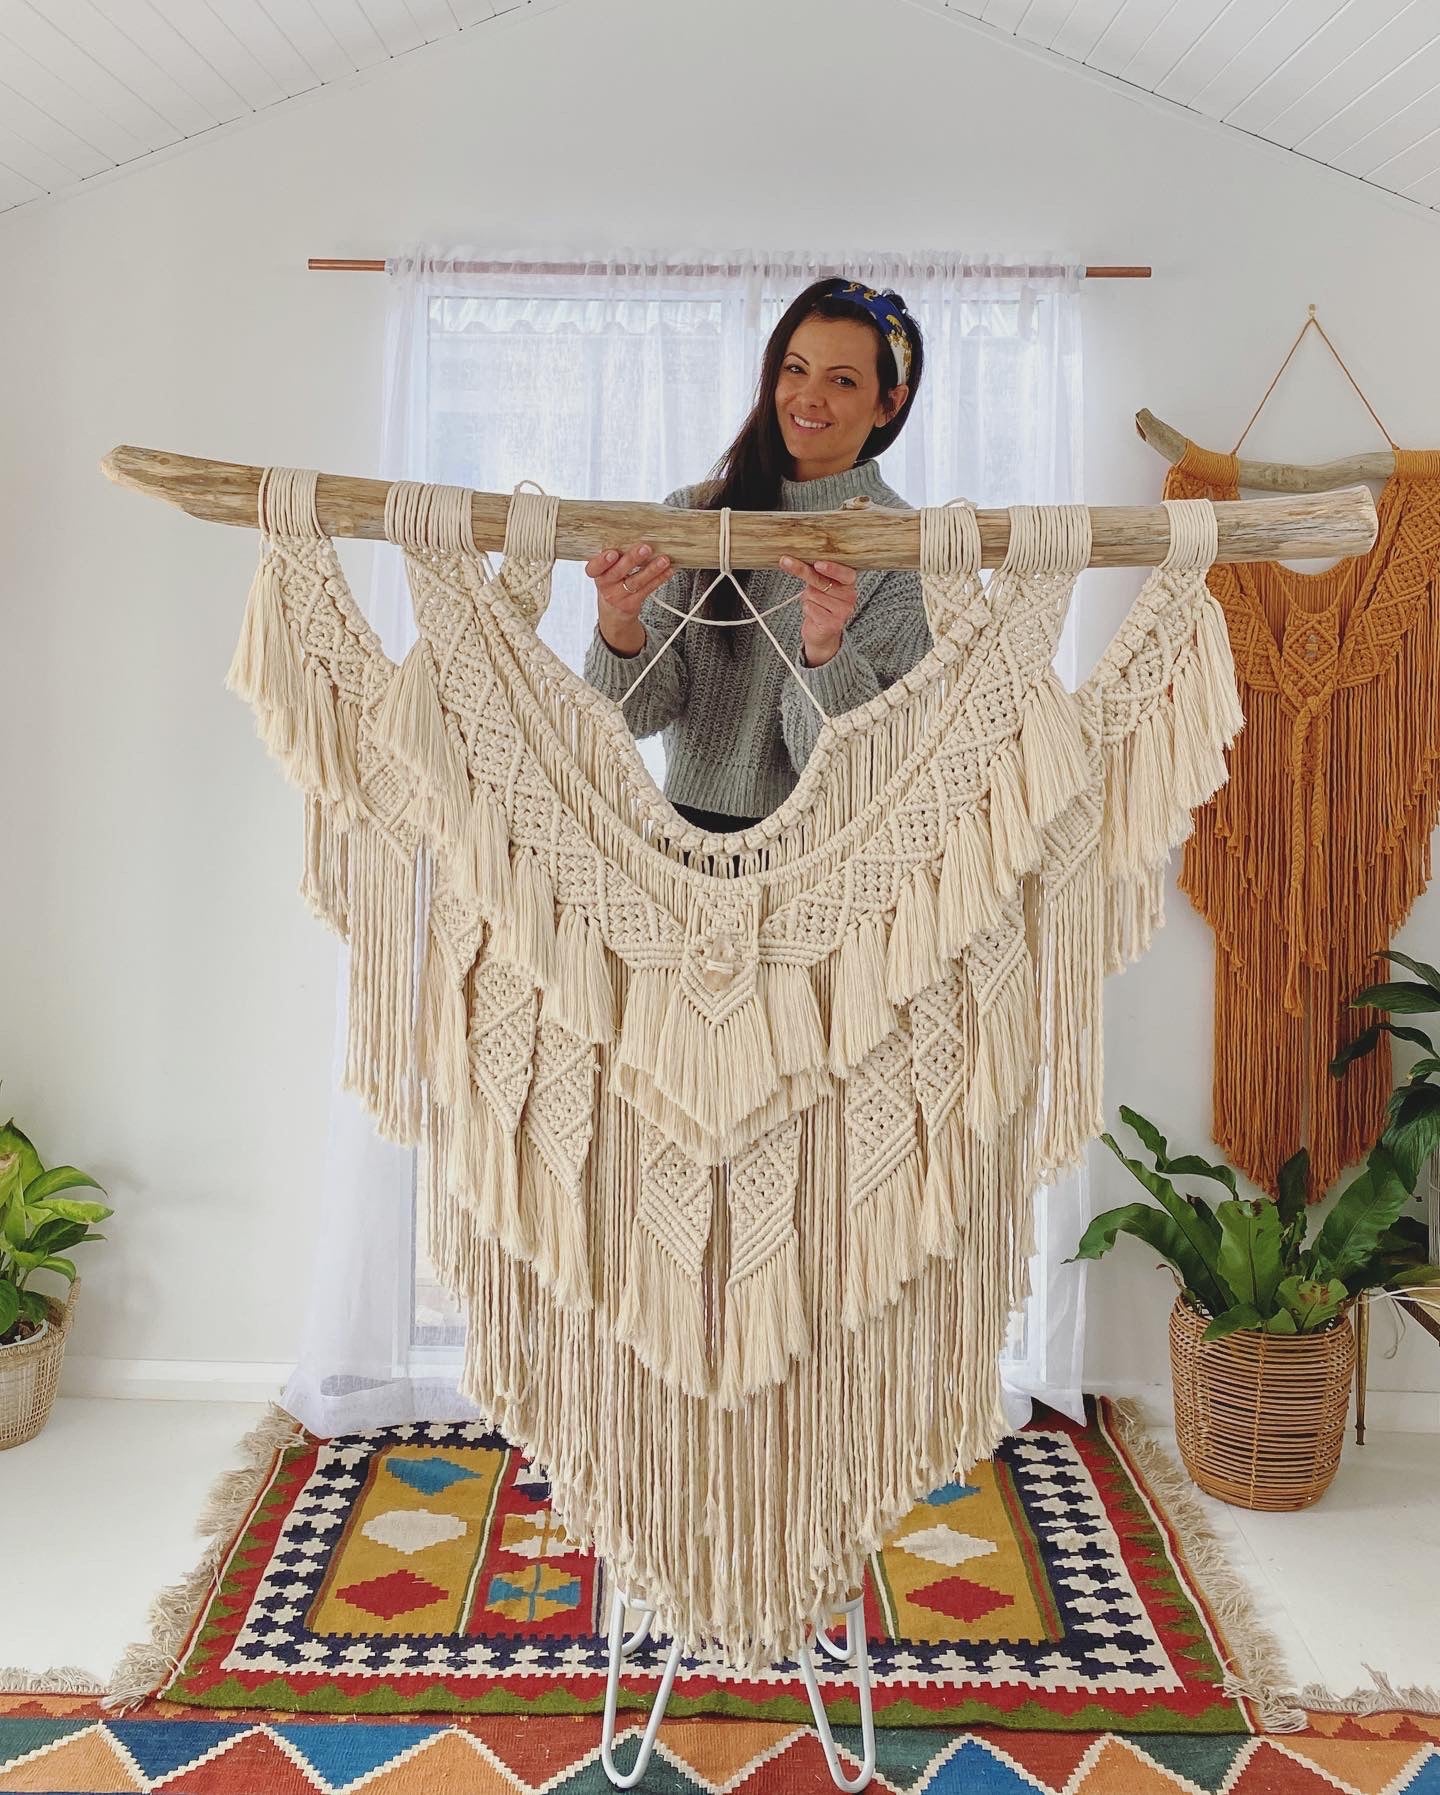 Where there's a will there's a way  - Custom made Macramé Wall Hanger